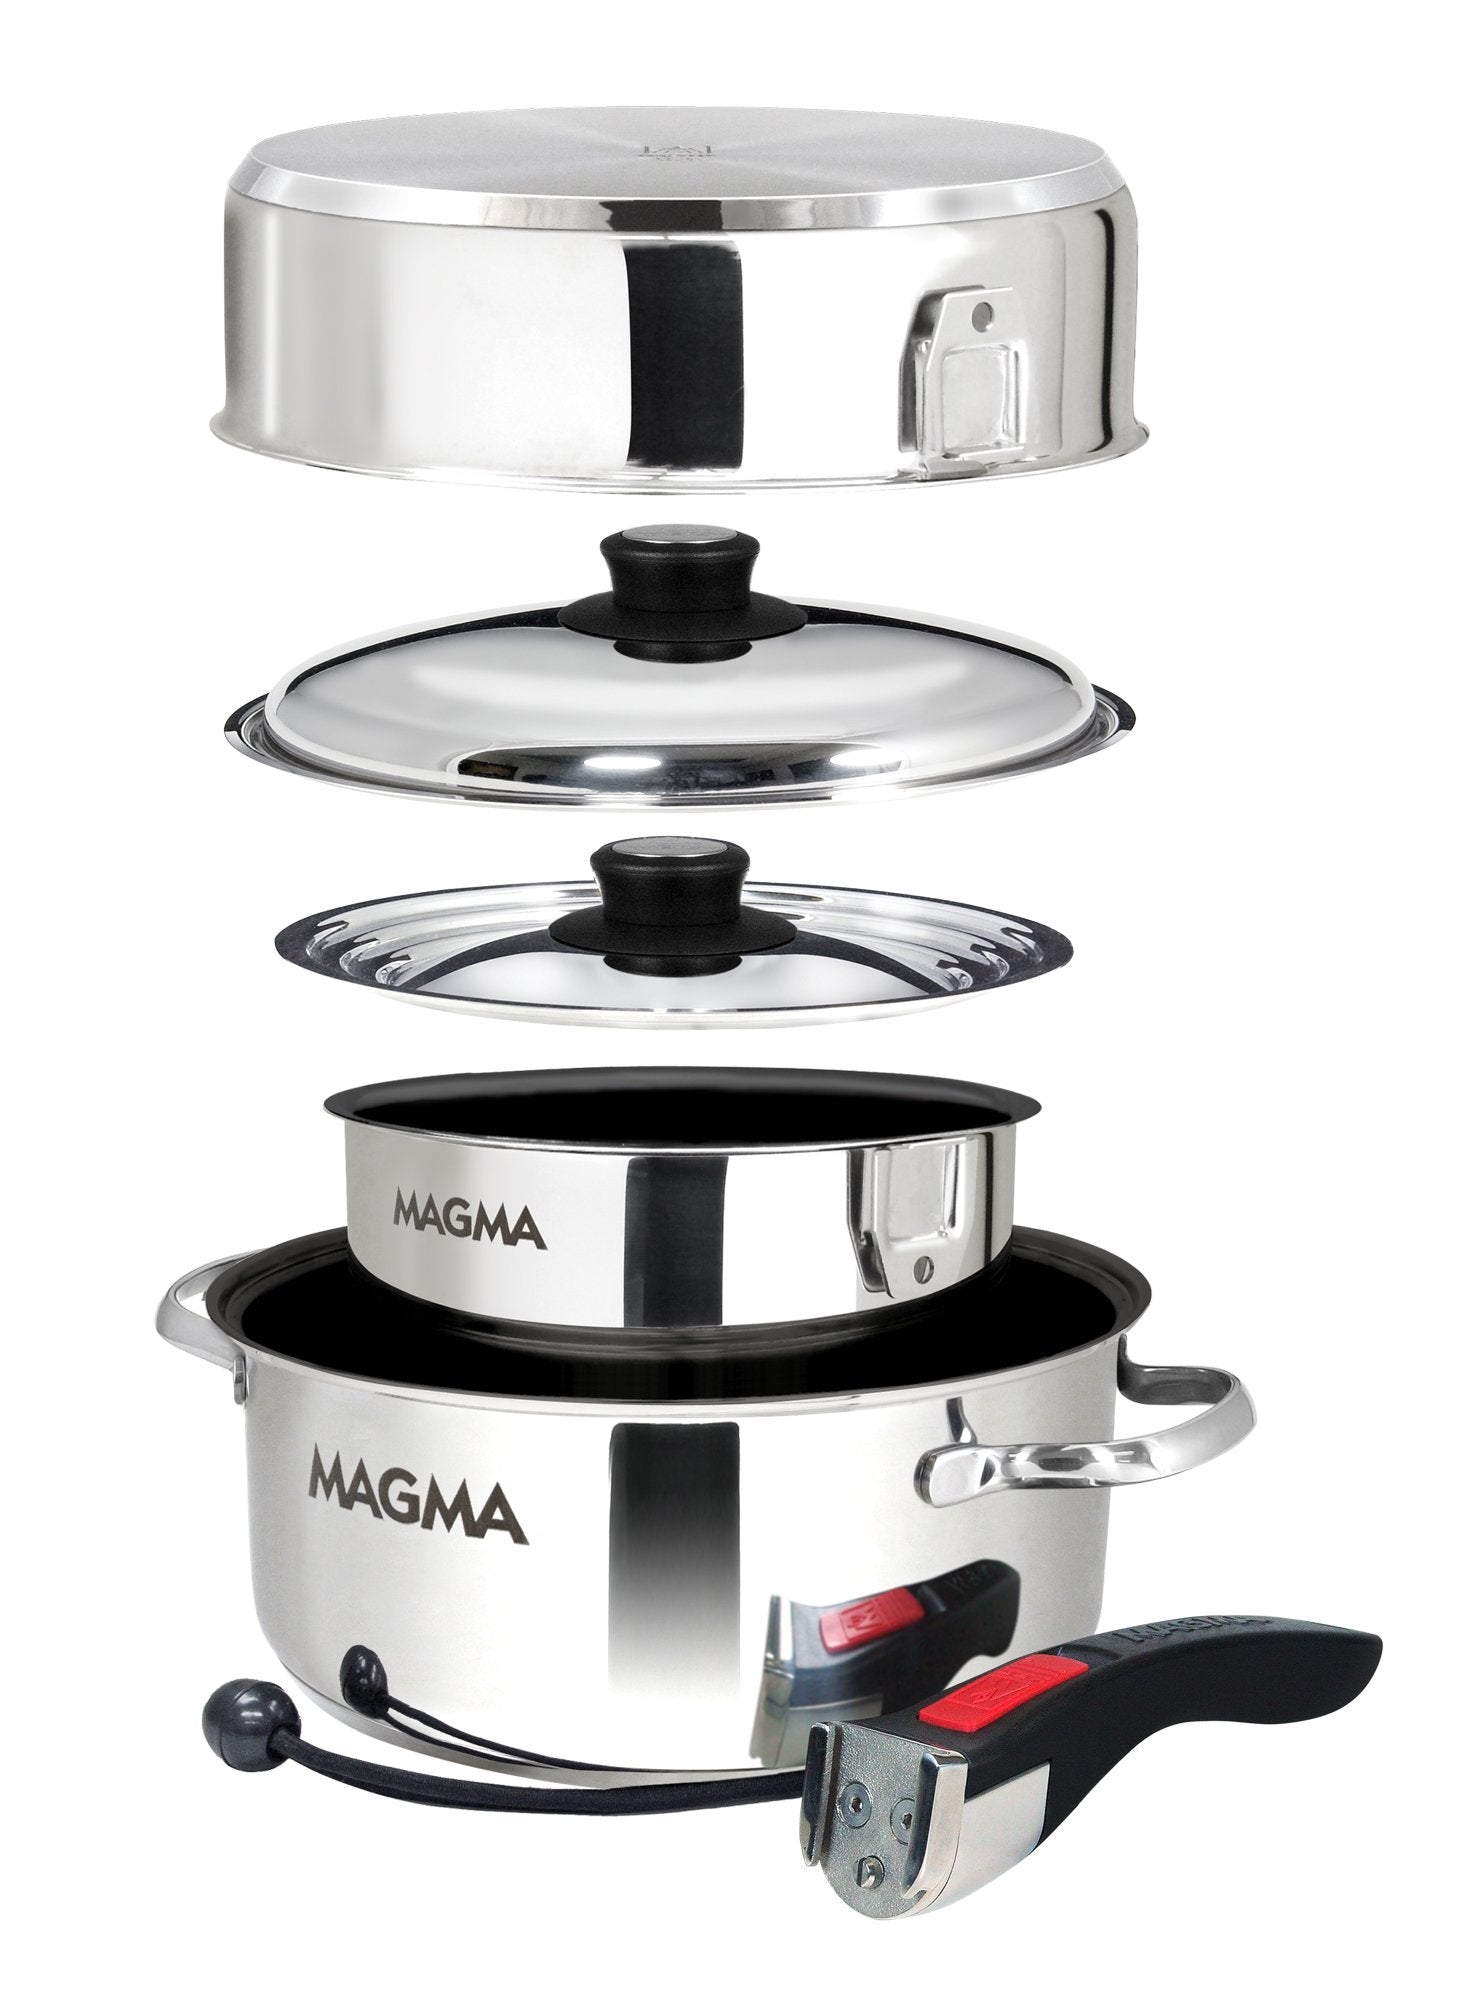 Magma Nestable 7 Piece Induction Cookware